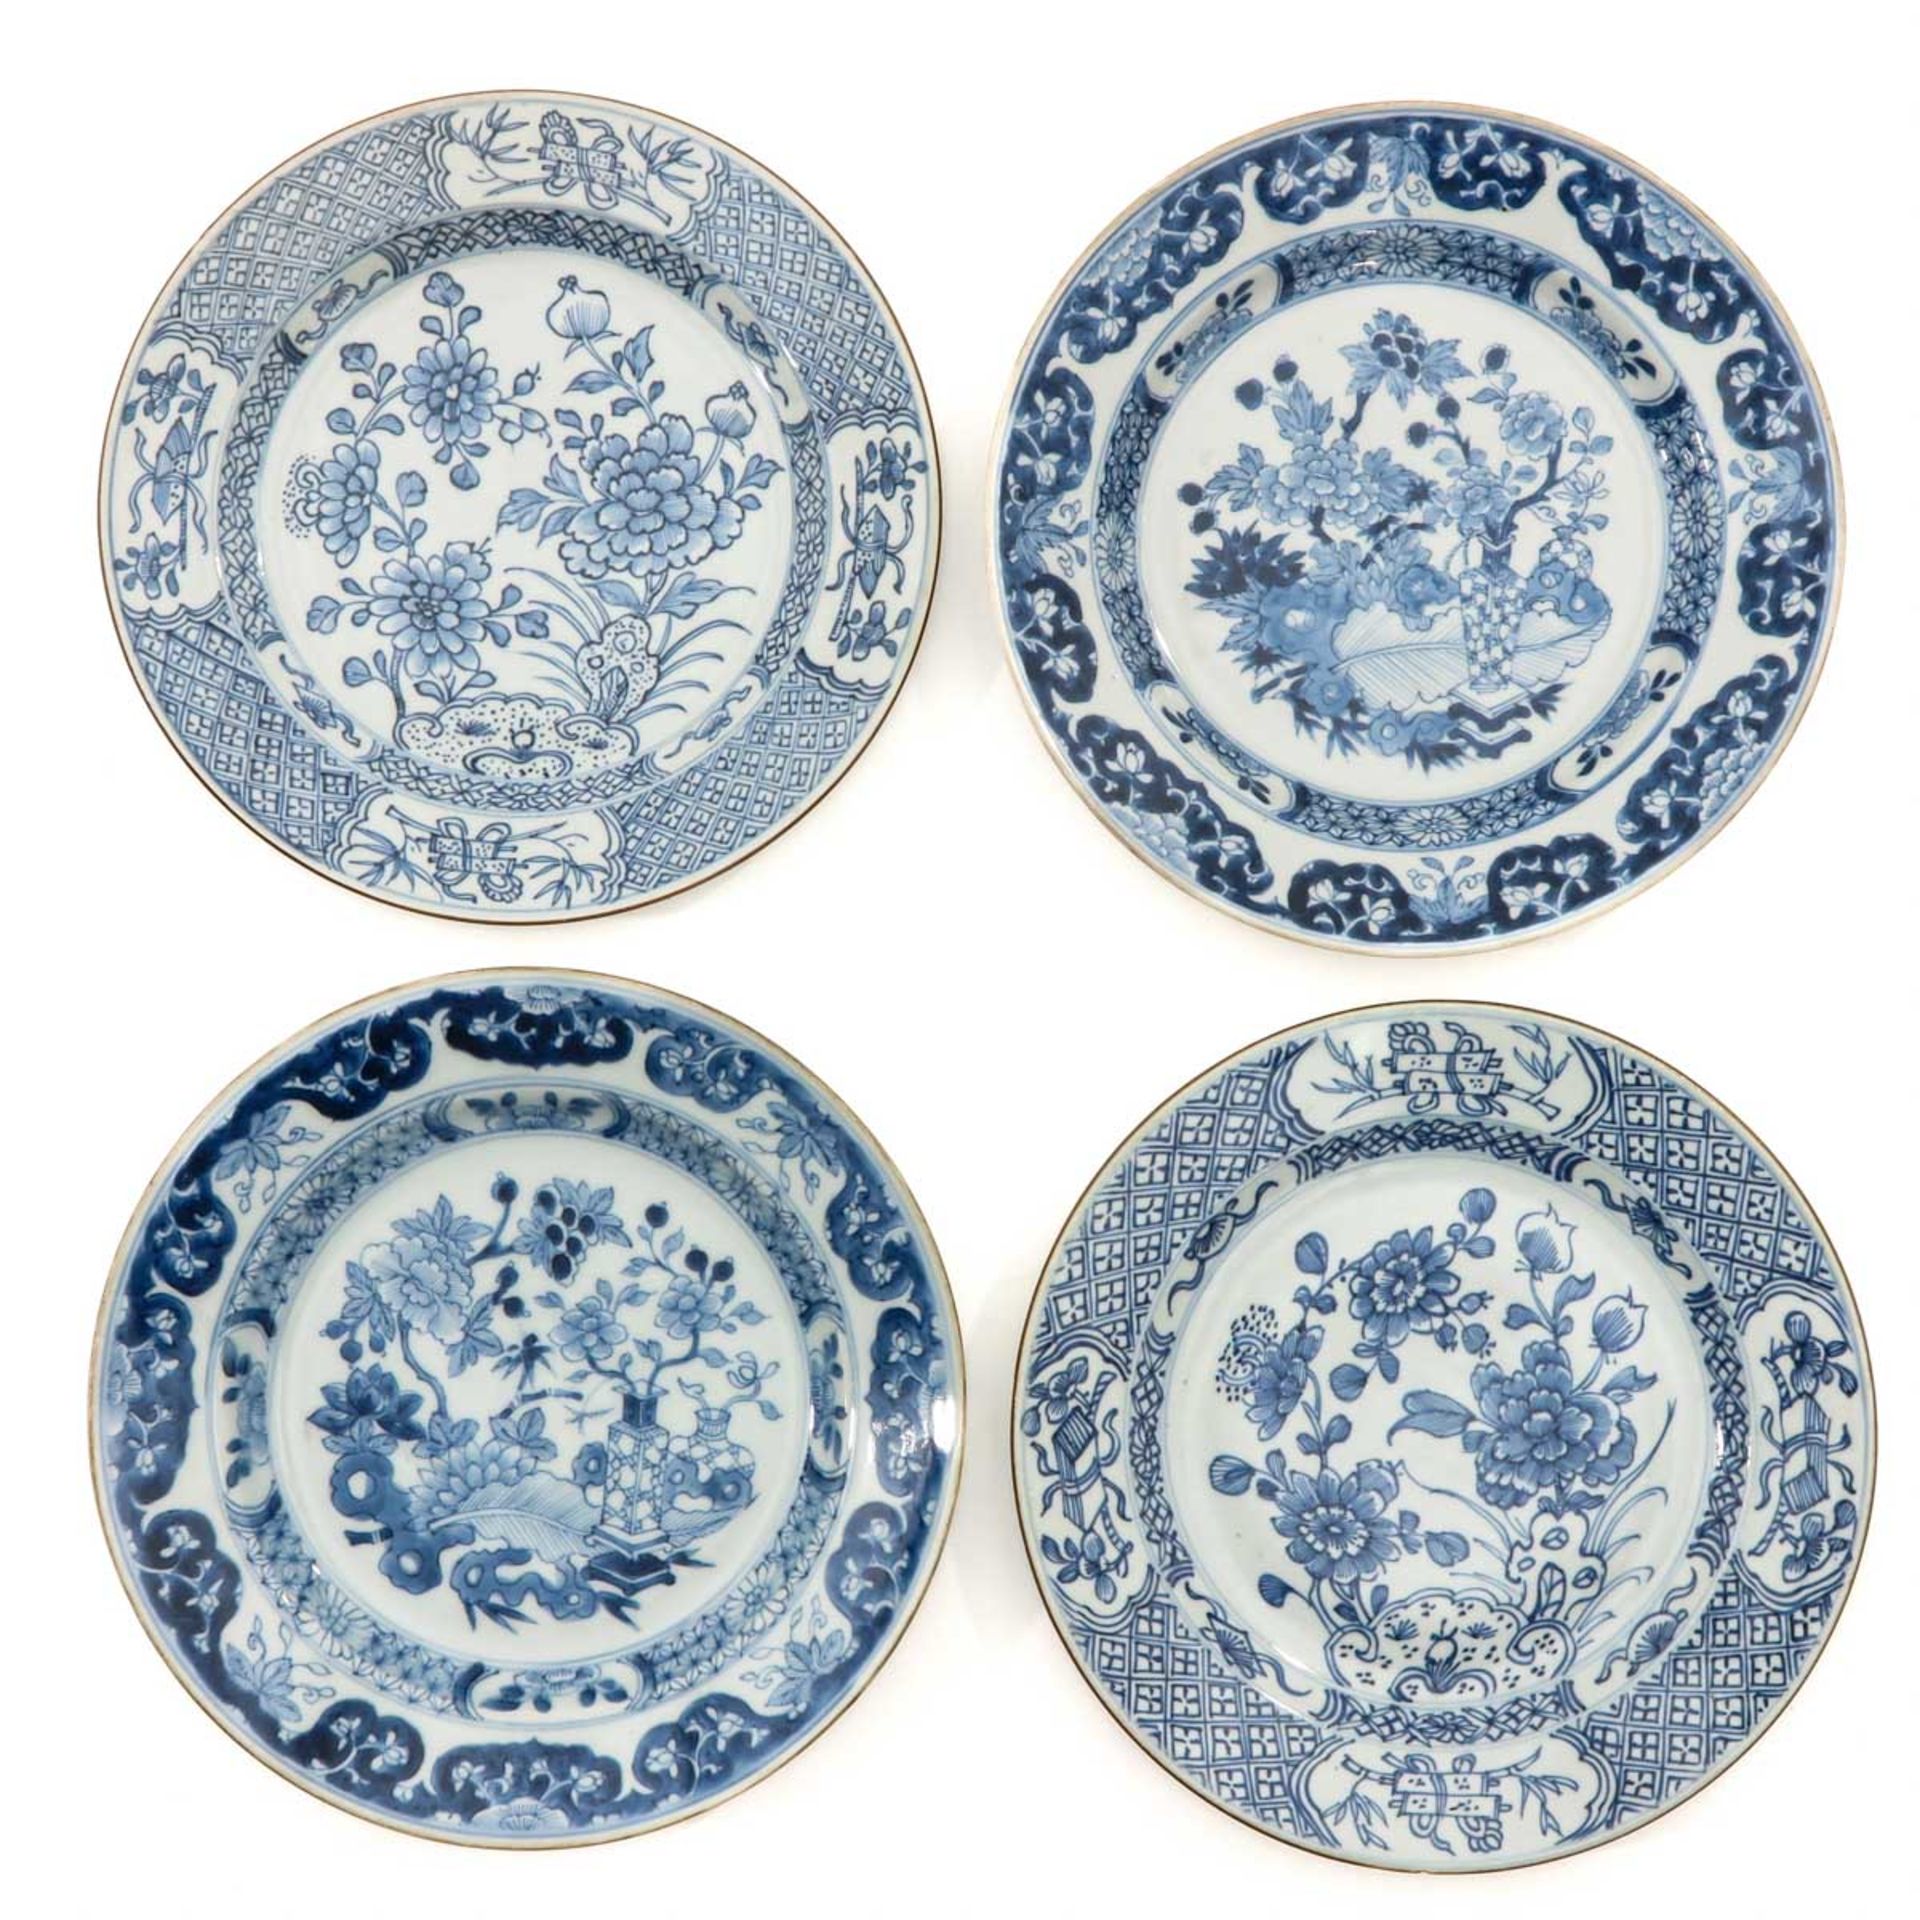 A Collection of 4 Blue and White Plates